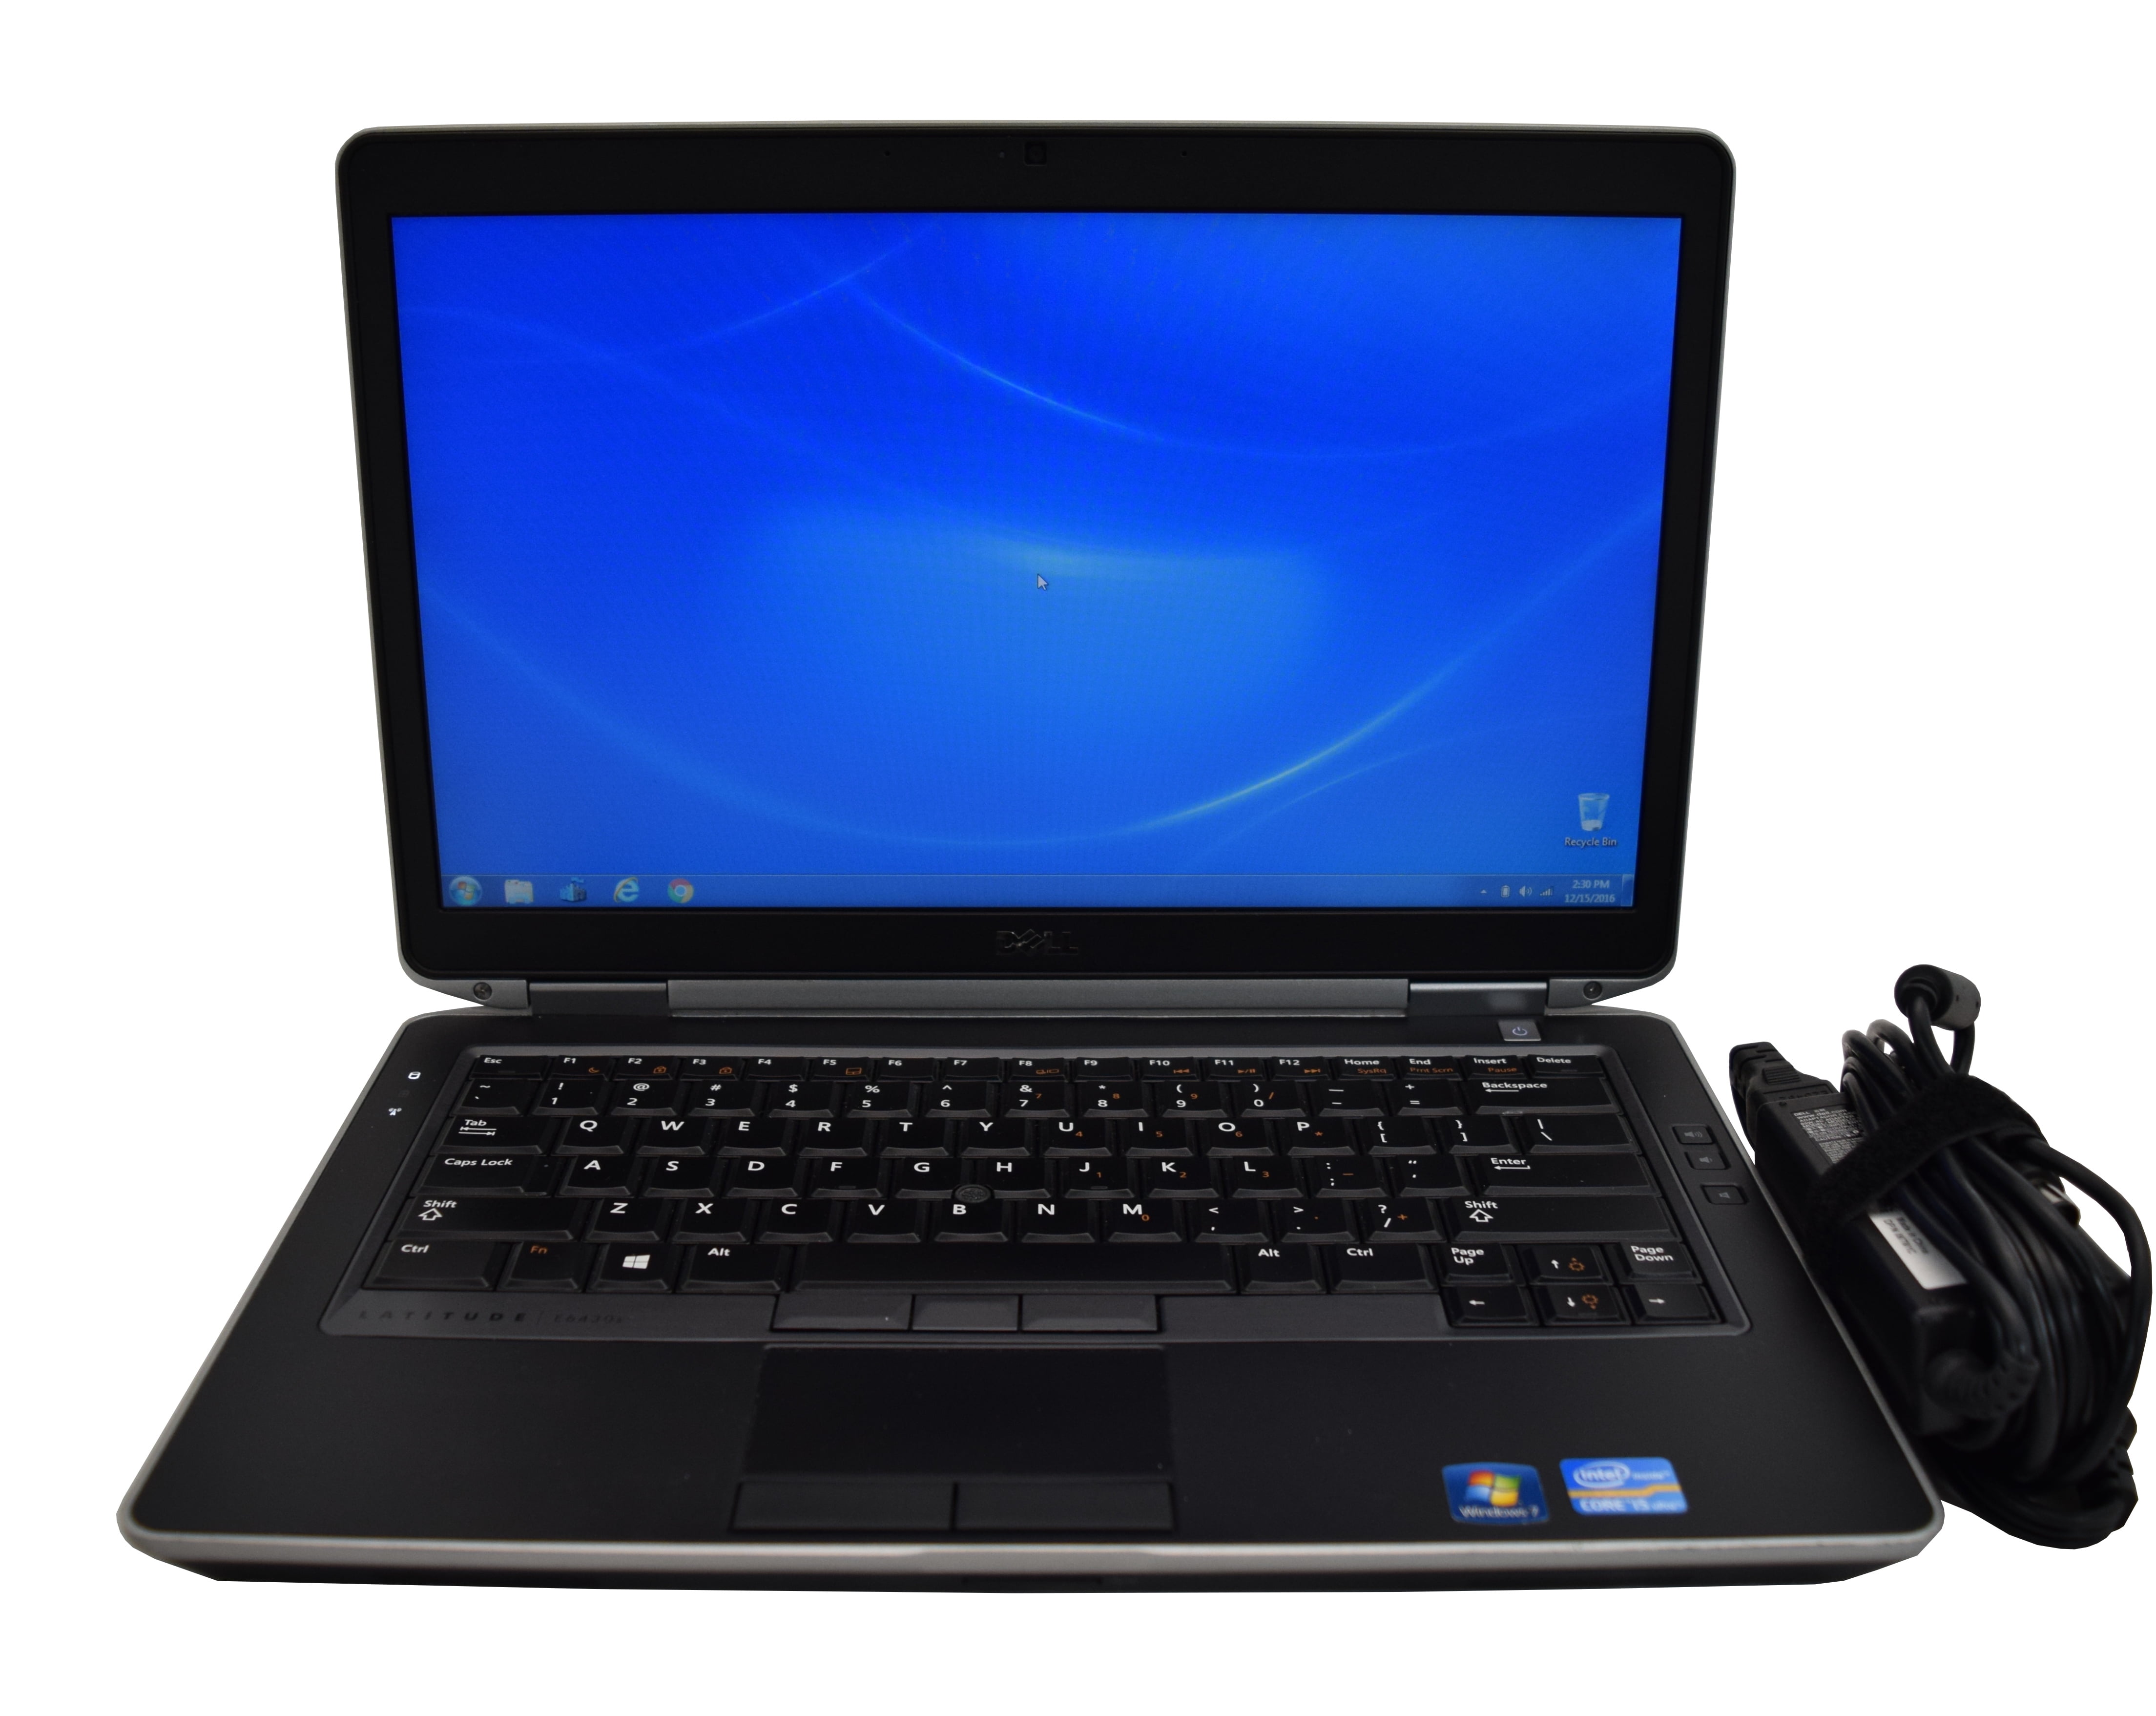 Buy Used Dell Latitude E6430 Laptop i5-3320M  4GB RAM 250GB HDD 14 Windows  7 Pro Grade B Online at Lowest Price in Ubuy Tunisia. 118033246